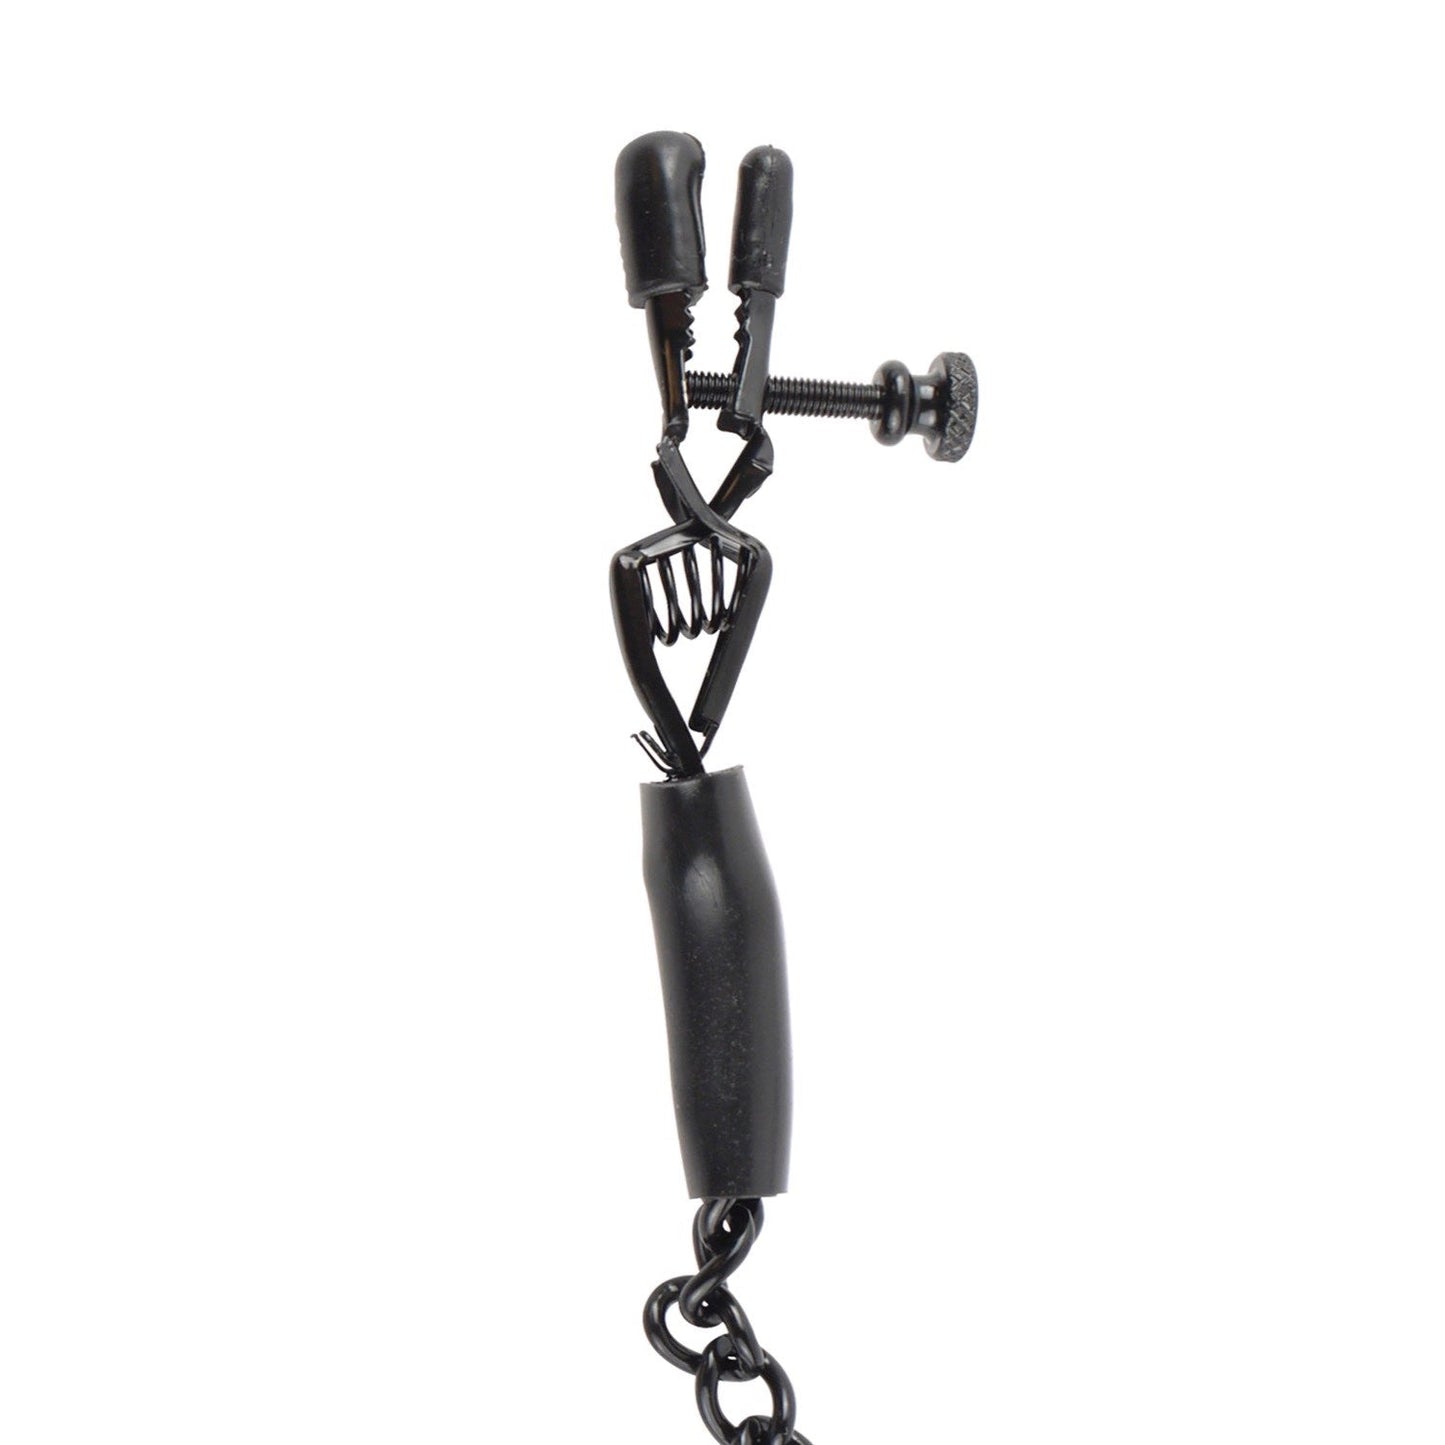 Adjustable Nipple Chain Clamps - Black Nipple Clamps with Chain